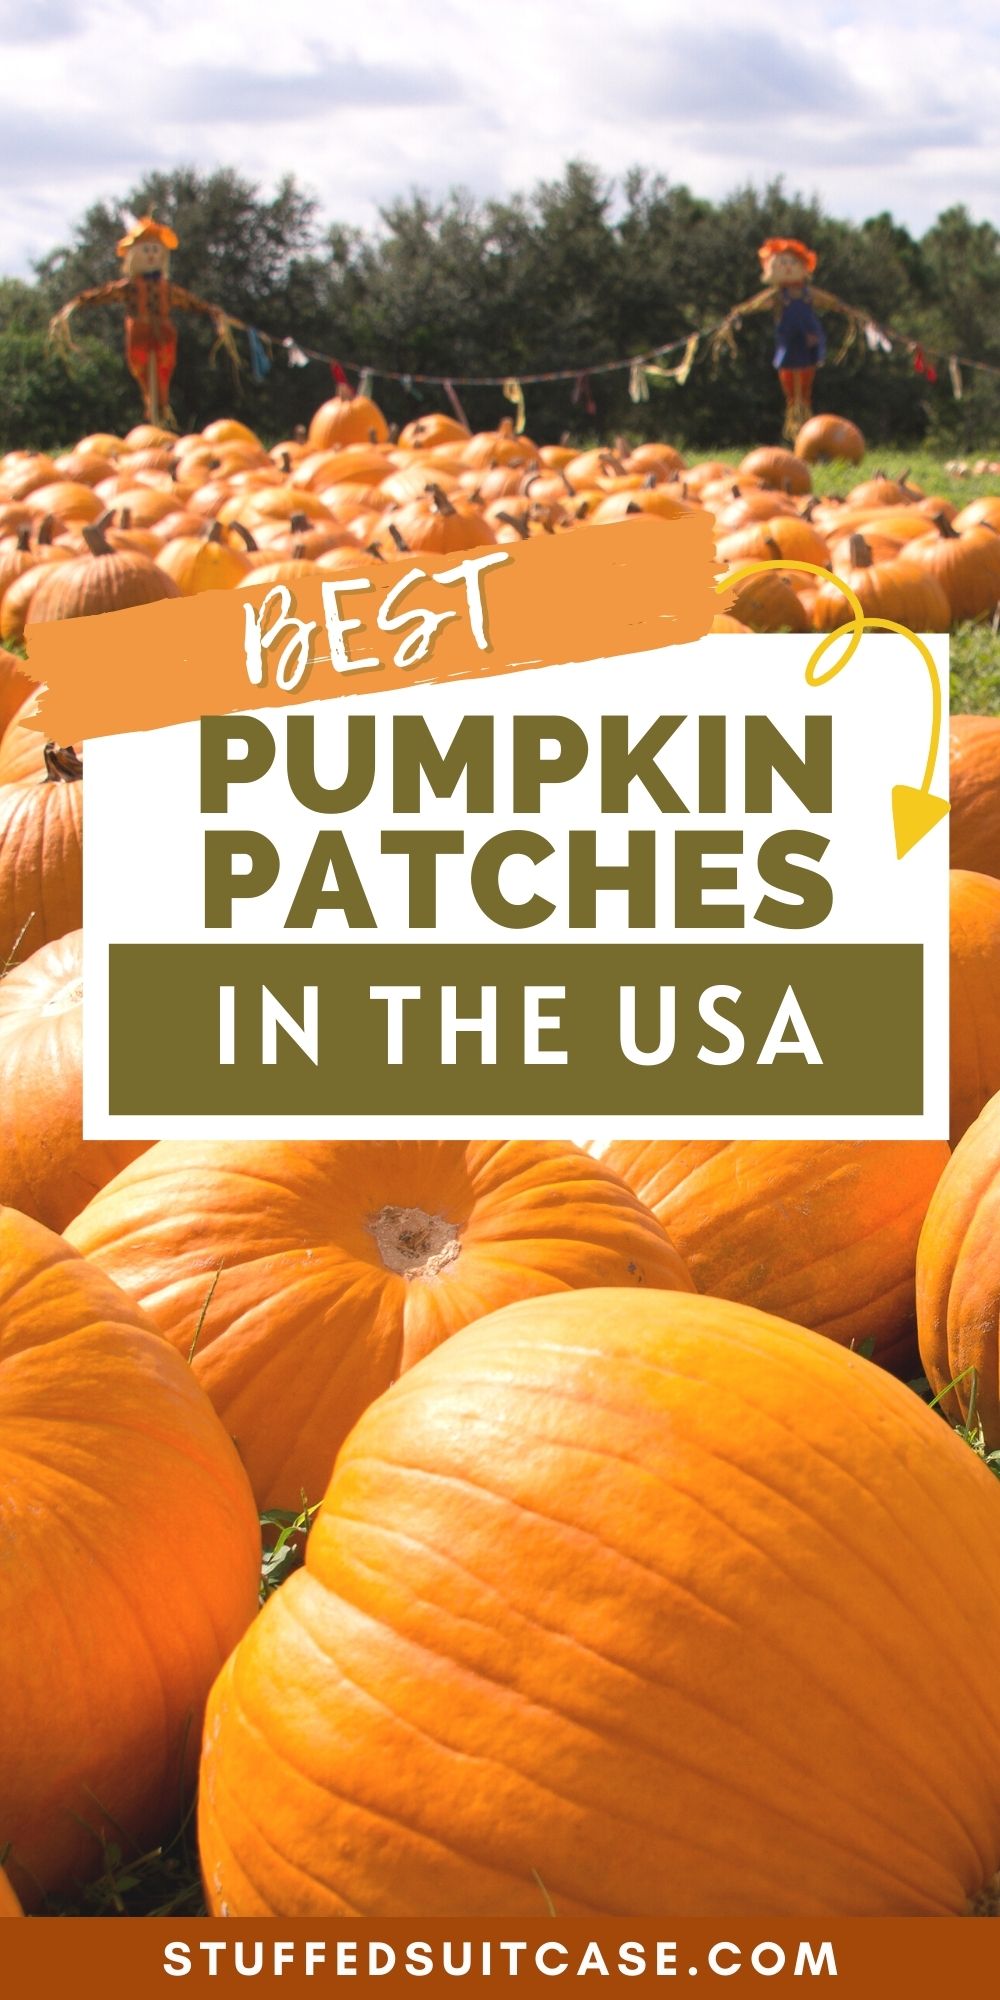 pin text best pumpkin patches in usa overlay on pumpkin patch image